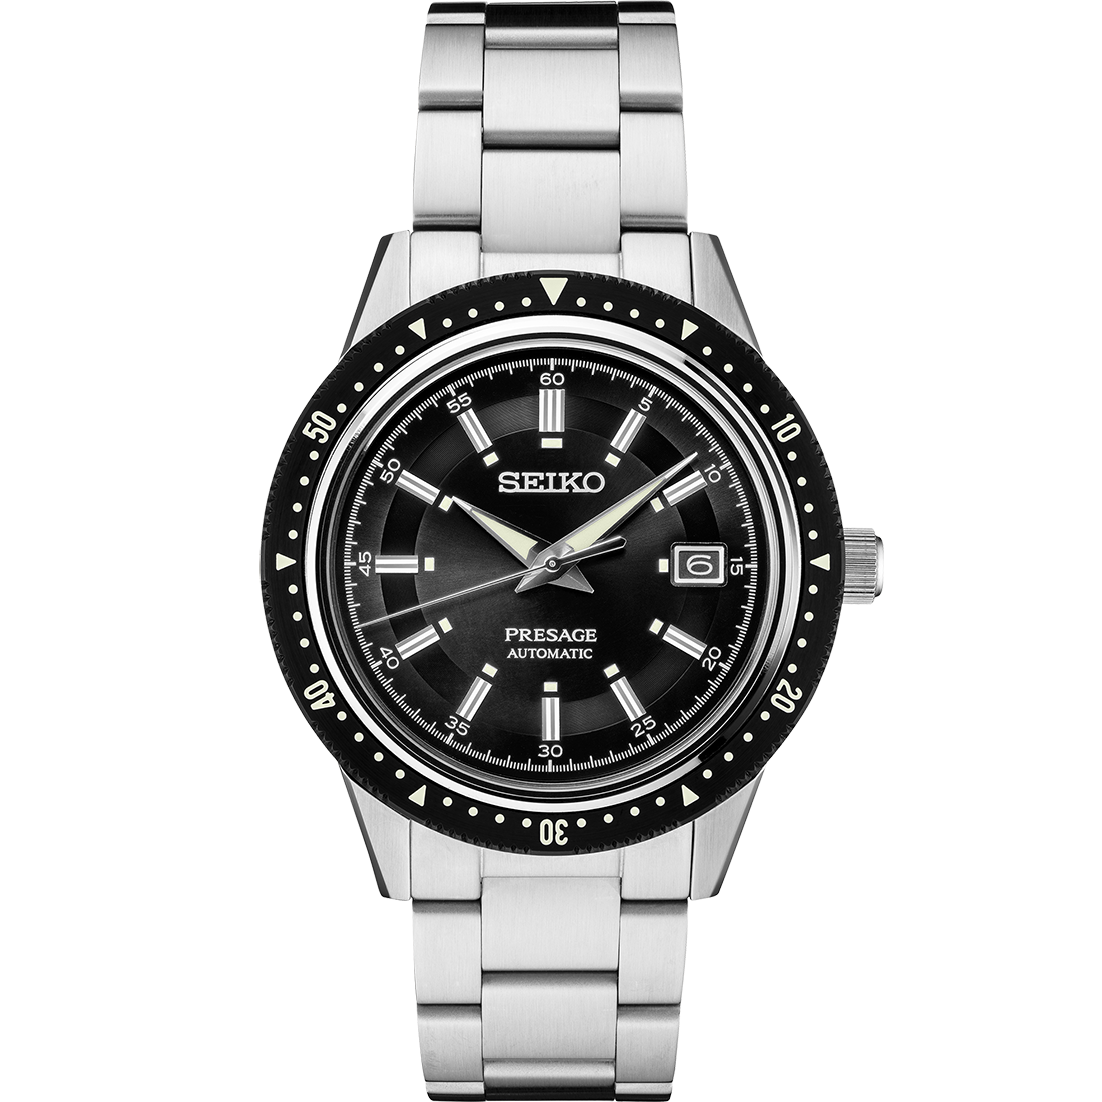 Seiko Presage 41.3mm Stainless Limited Edition Steel Automatic With Manual Winding Capacity Has
Black Dial With Silver Indexes, Sapphire Crystal With Anti-Reflective Coating On Inner Surface And Black
 Rotating Bezel